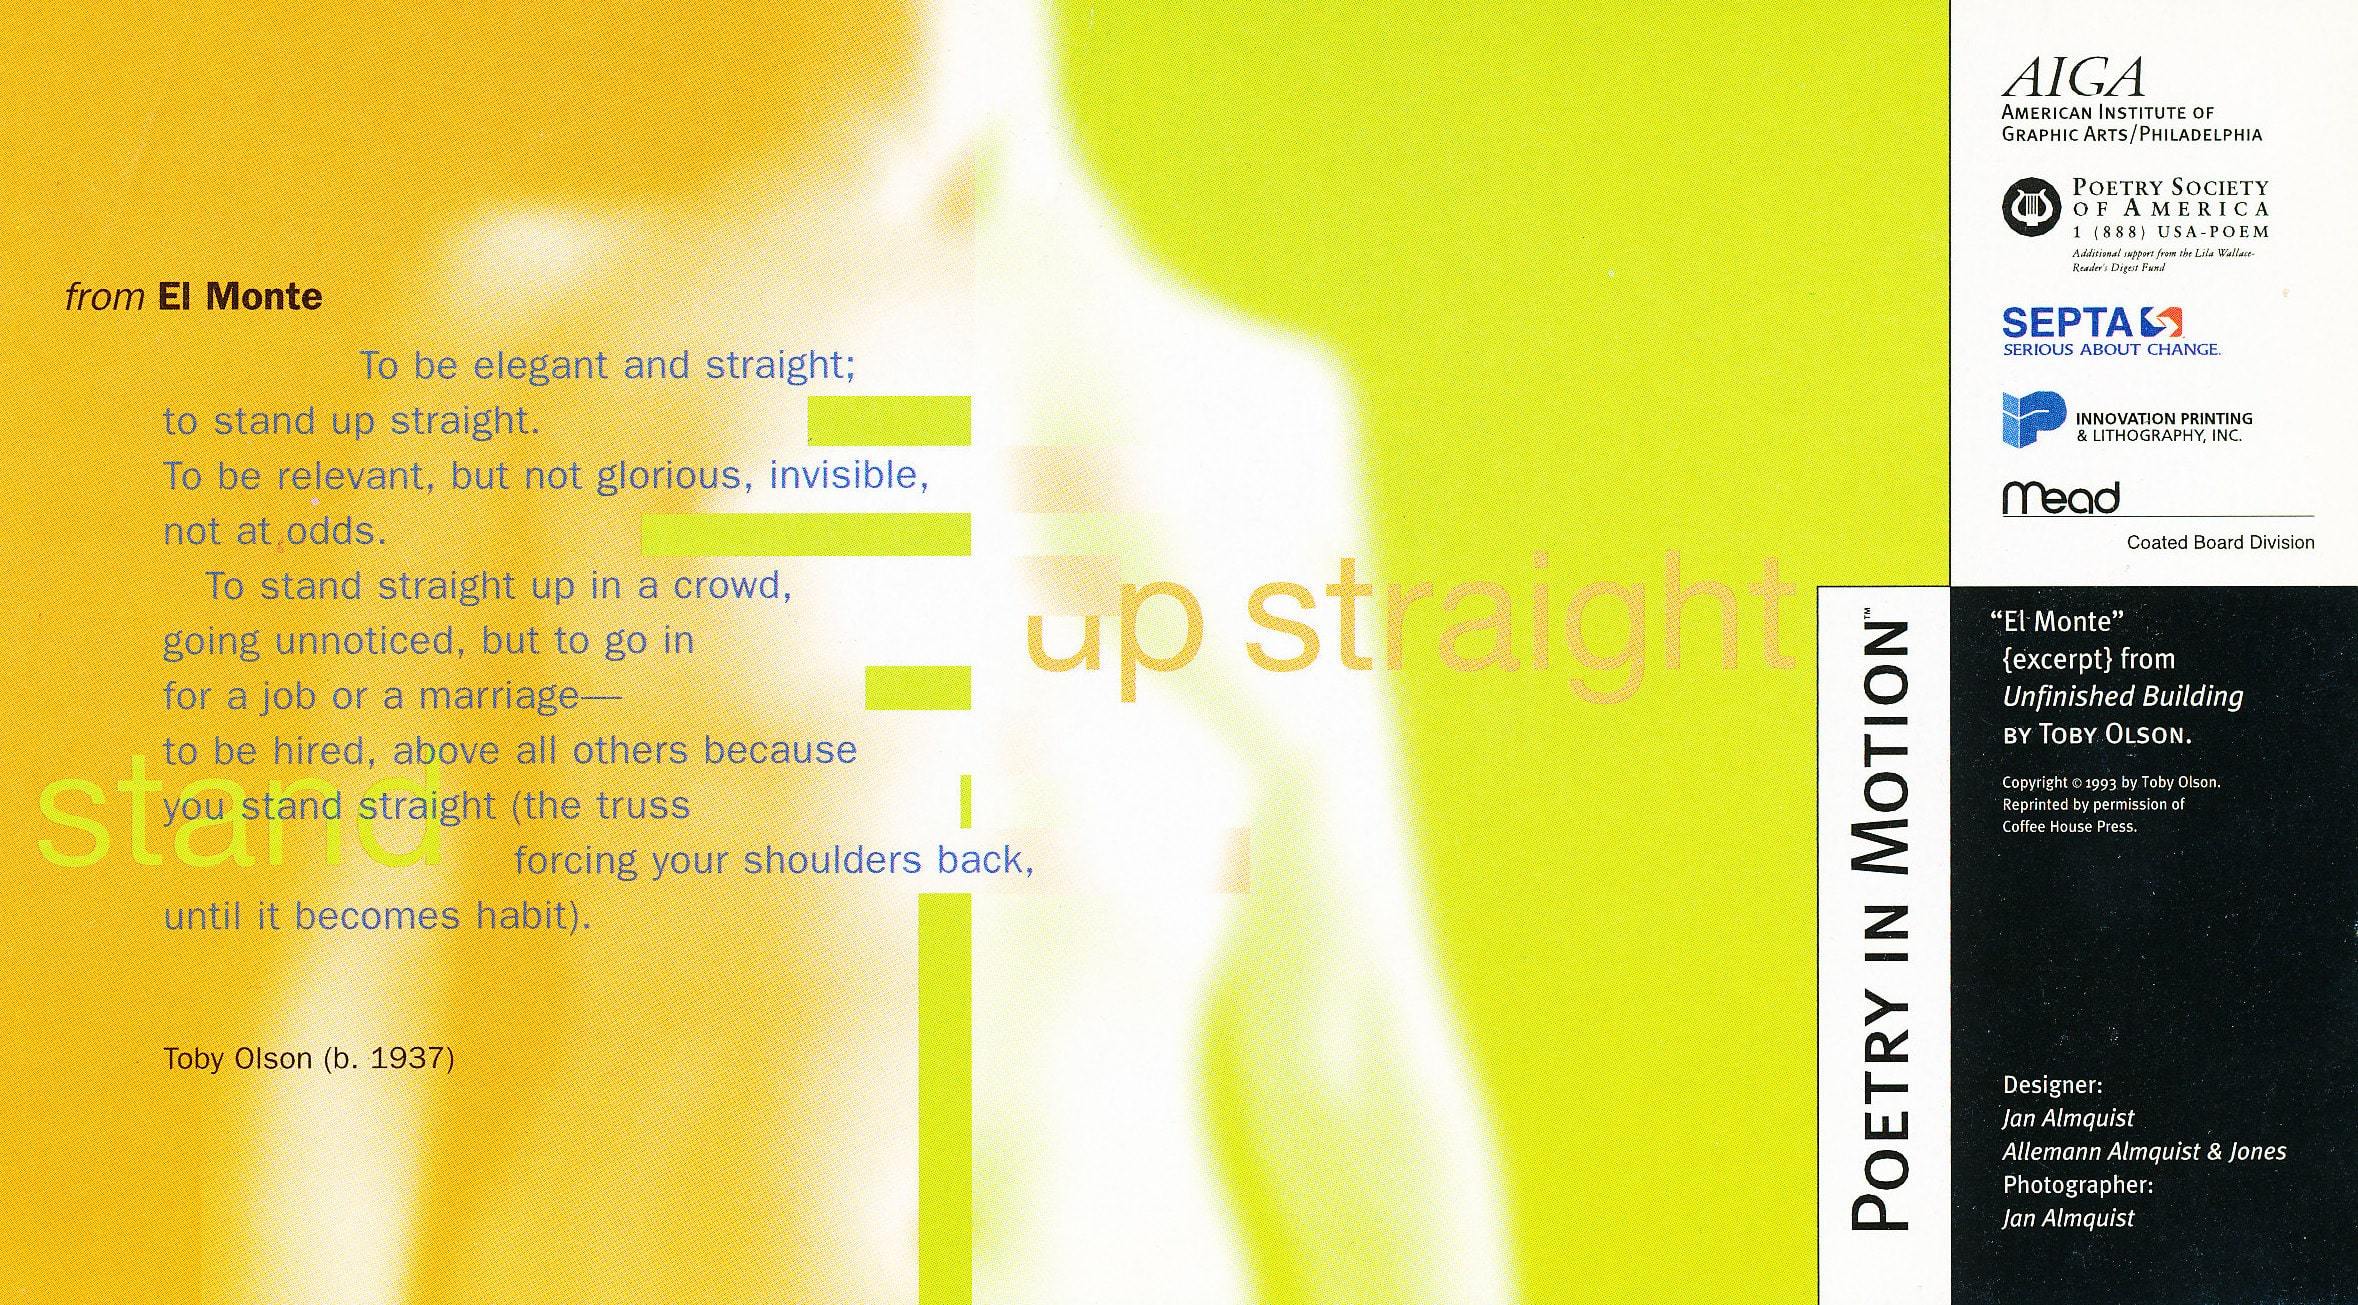 A poster features a white silhouette of a torso among abstract shades of yellow. An excerpt from the poem El Monte by Toby Olson is written in grey text.